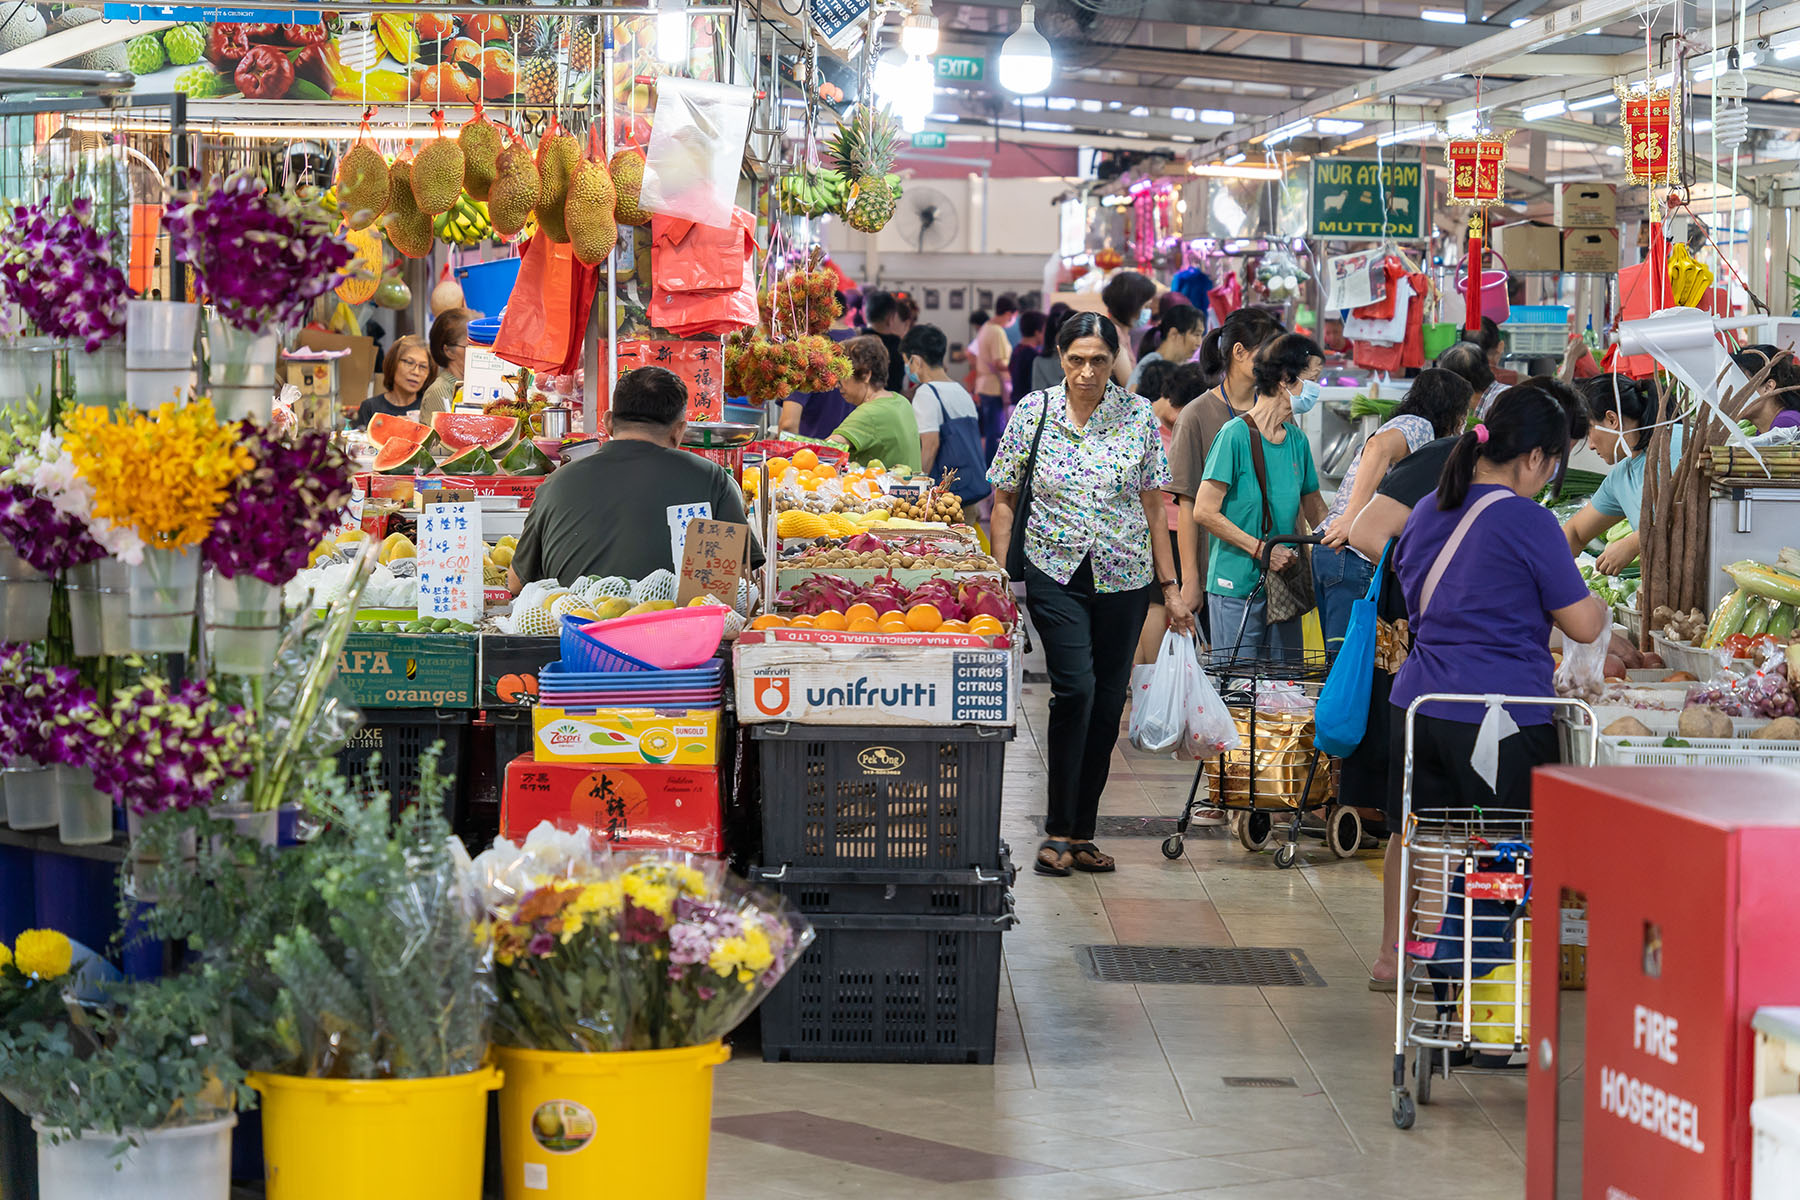 People walking at a wet market, buying flowers, fruits, and vegetables.